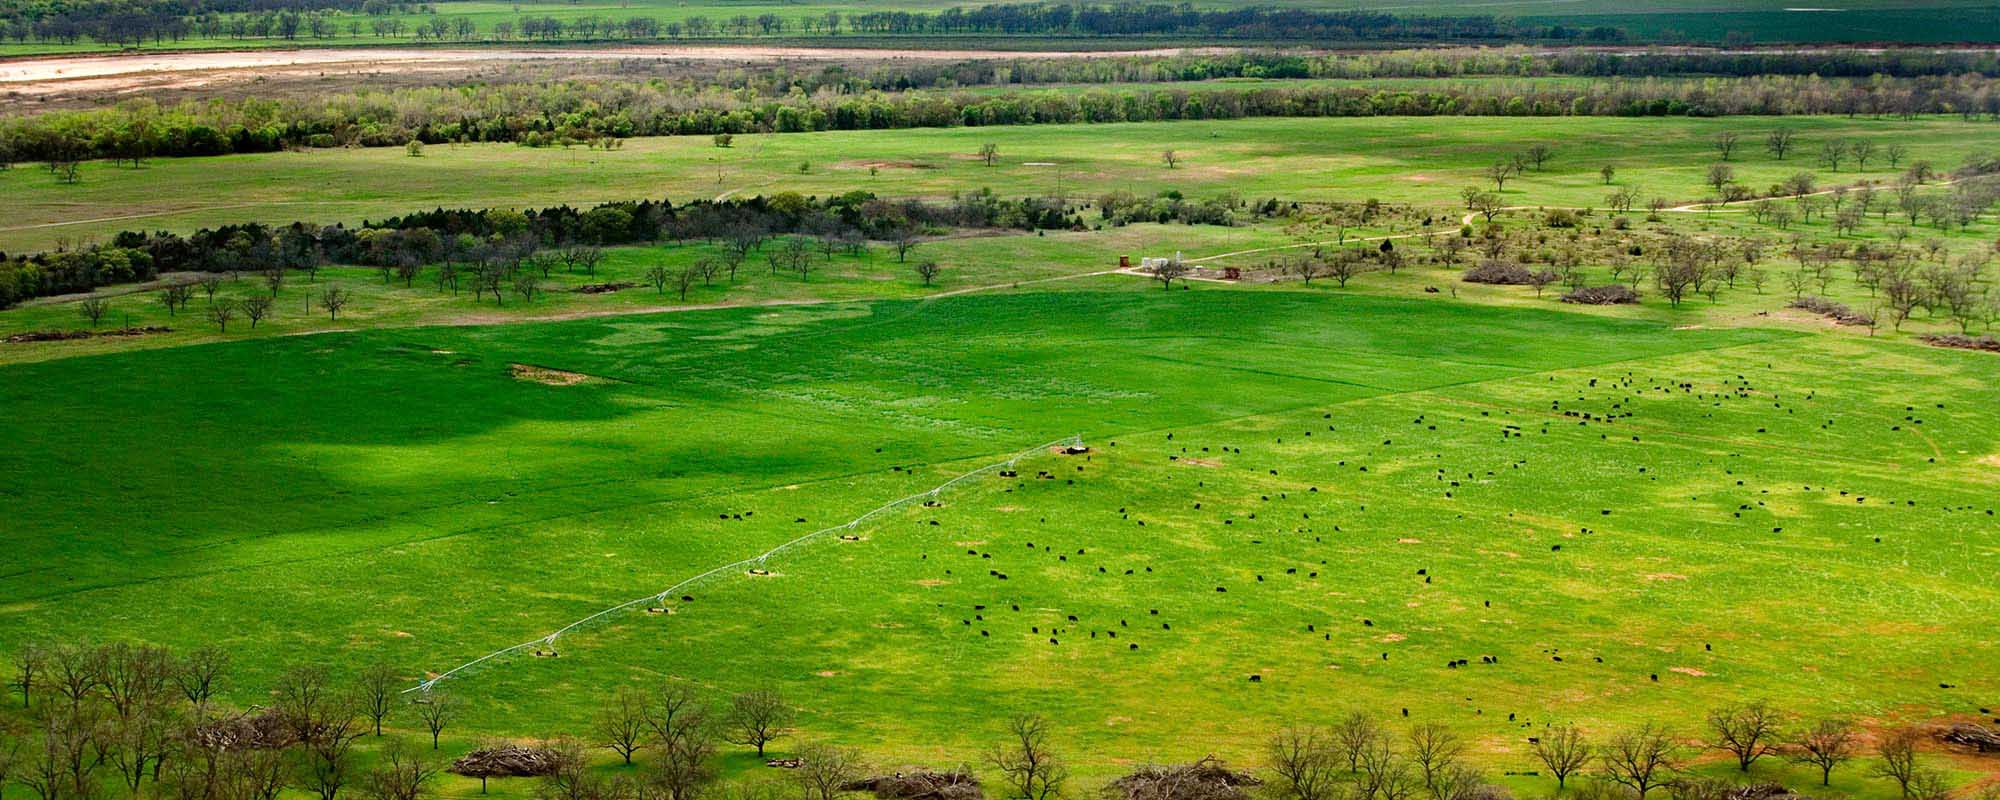 Purchasing Grazing Land for Cattle? Here's What to Look for Before Signing on the Dotted Line